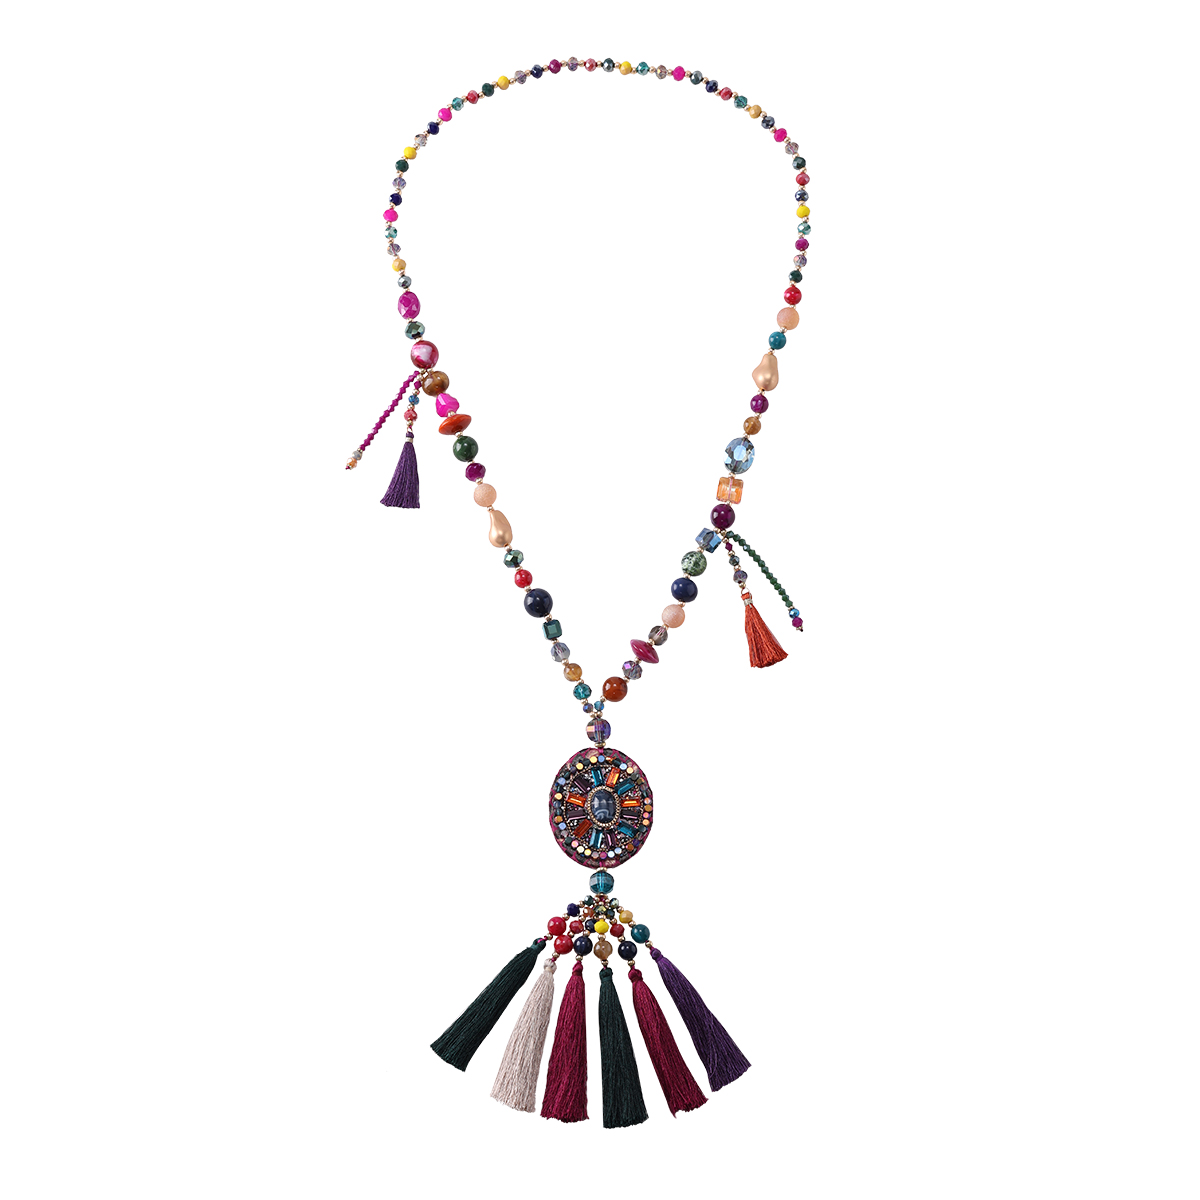 Crytal Shield Tassels Necklace